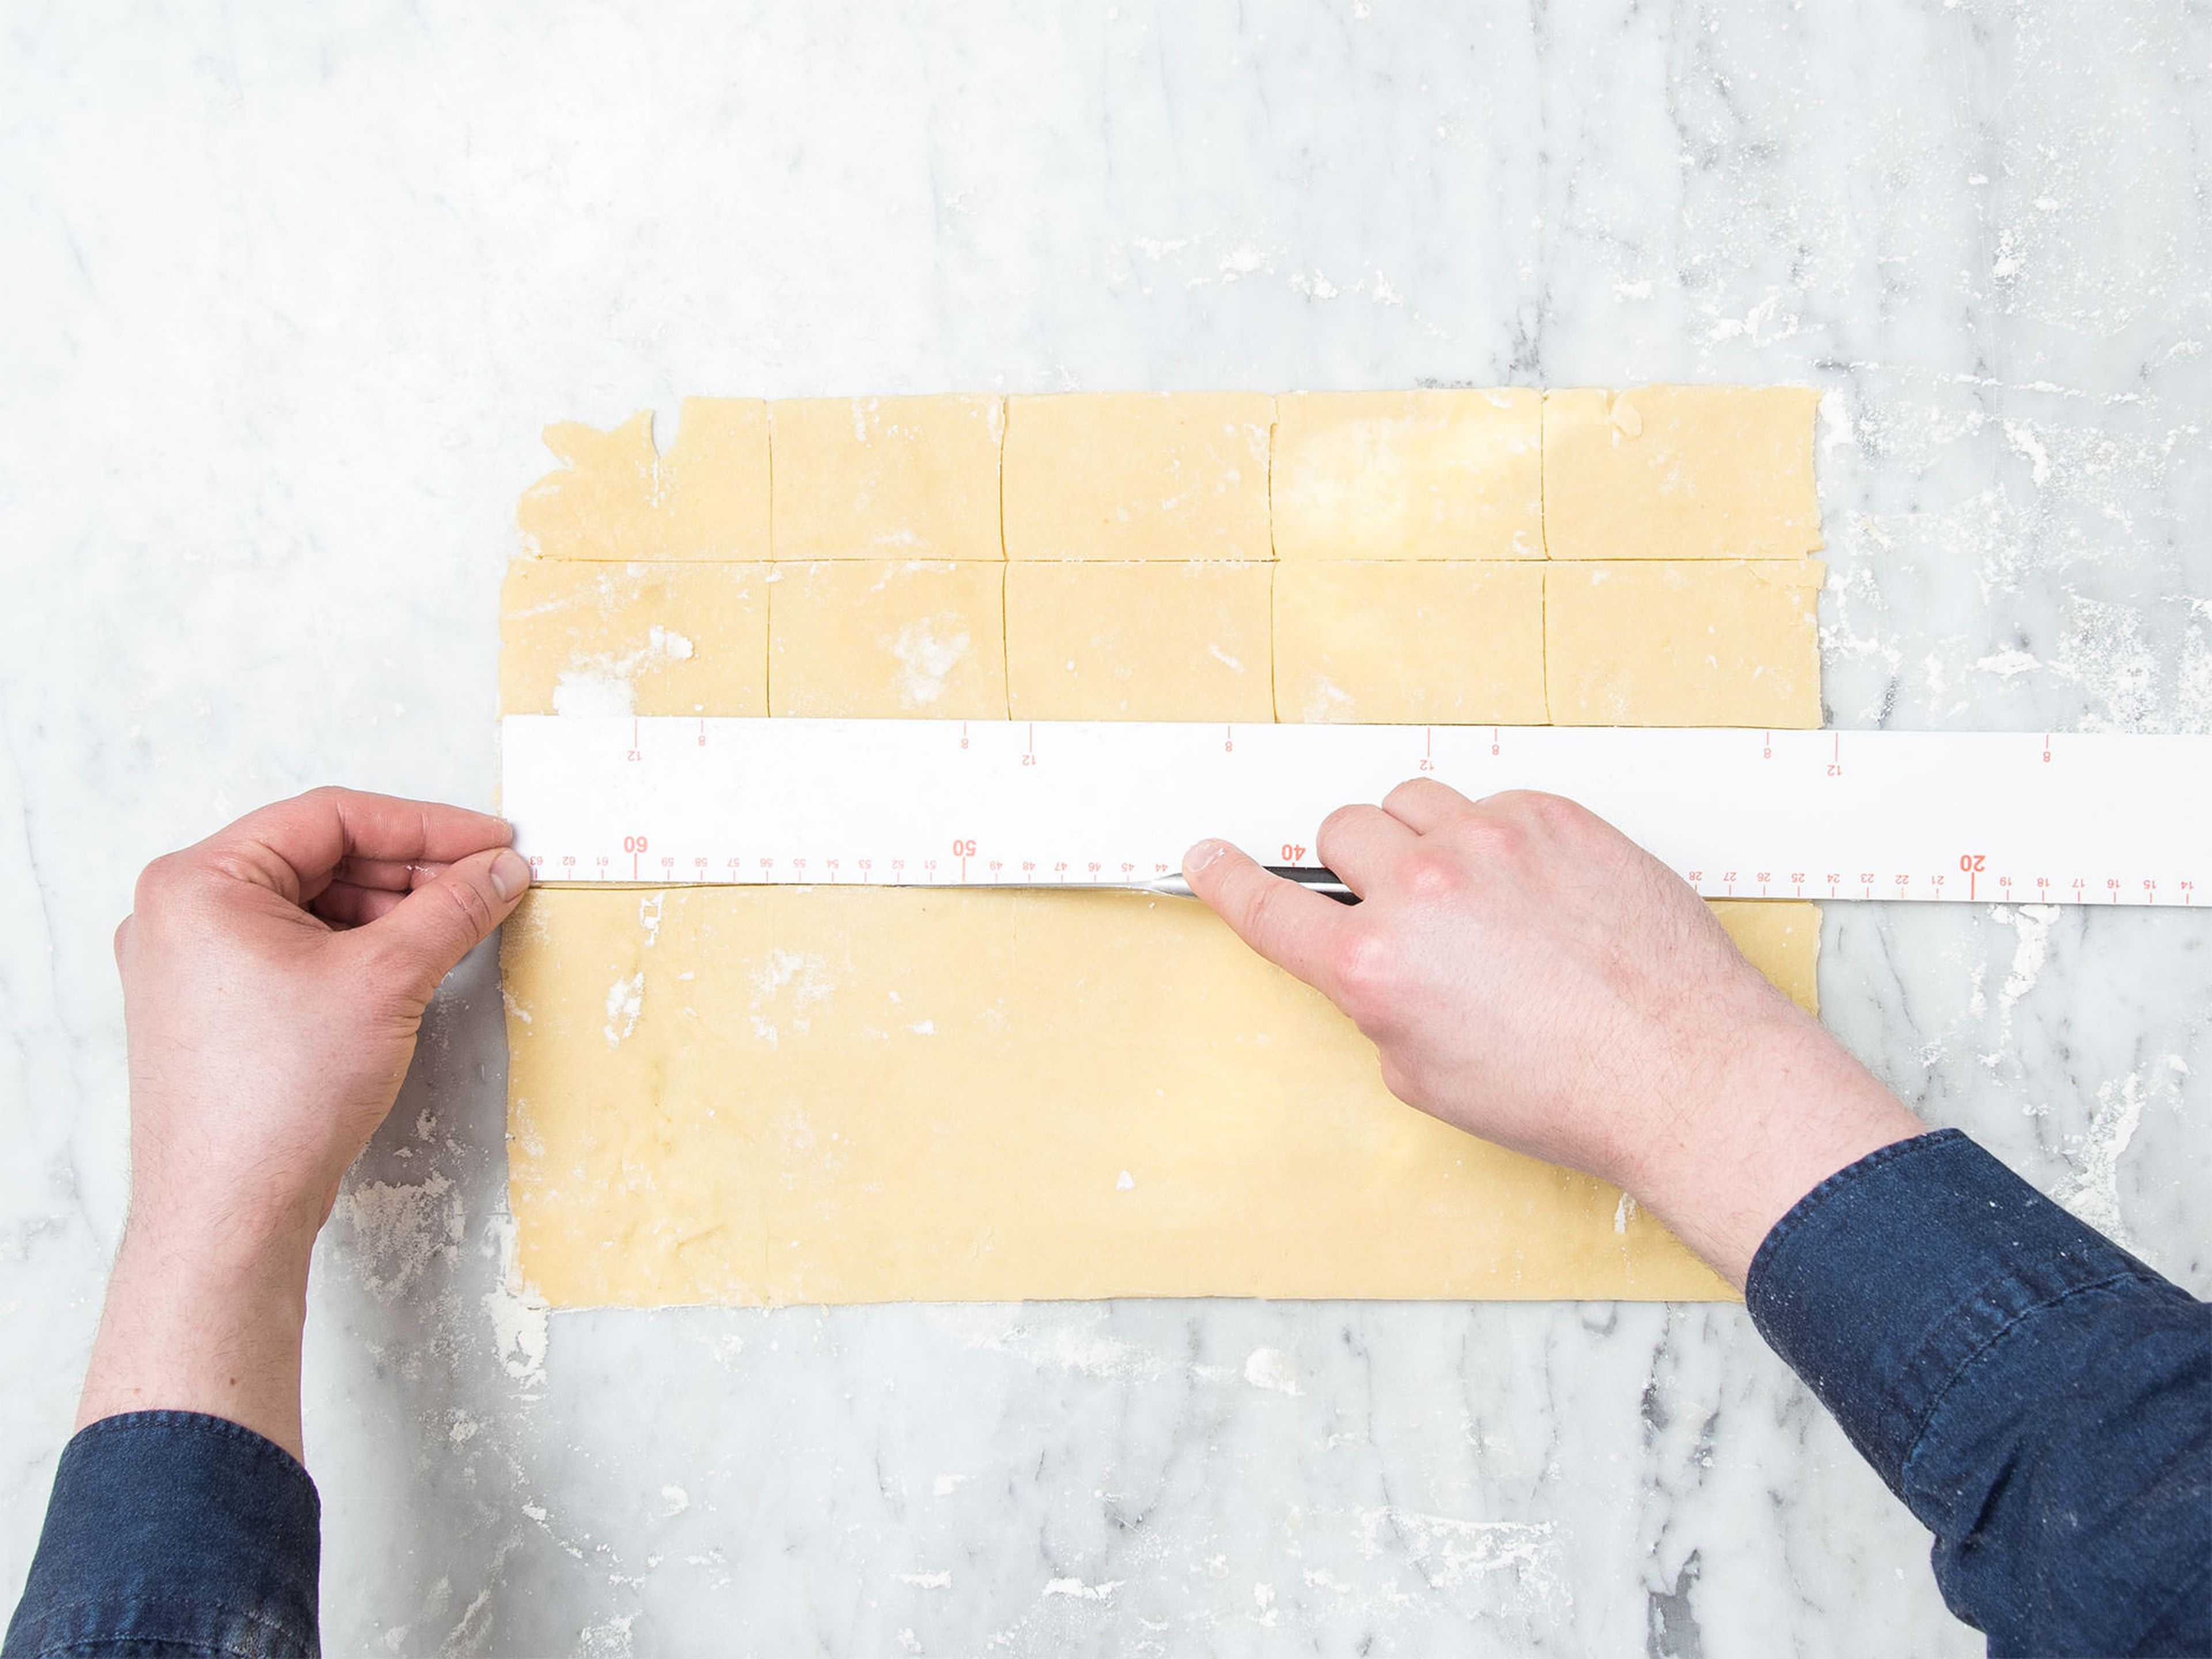 Roll out the dough on a floured work surface until approx. 3-mm/0.2-in thick. Trim the sides as needed and cut the dough into an even amount of rectangles of 5x8-cm/2x3-in. Transfer half of them onto a parchment-lined baking sheet.